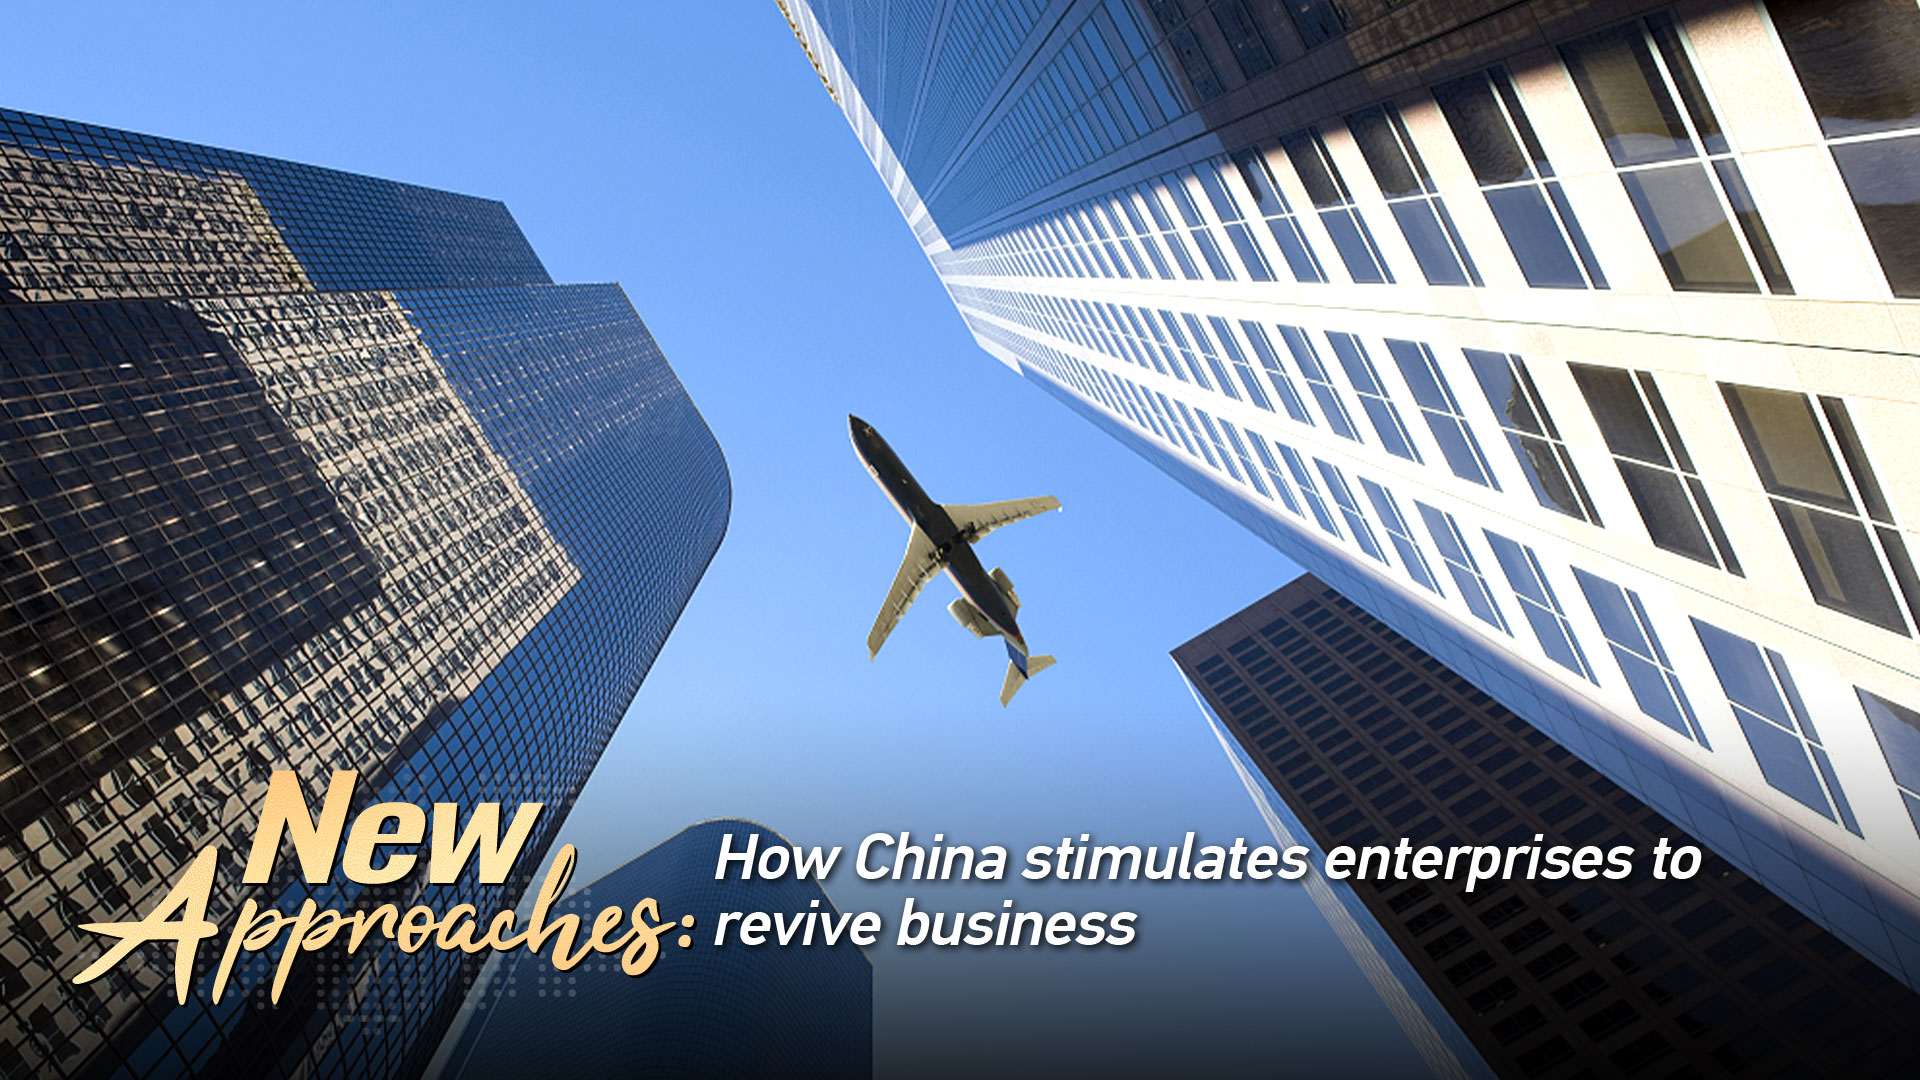 New Approaches: How China stimulates enterprises to revive business